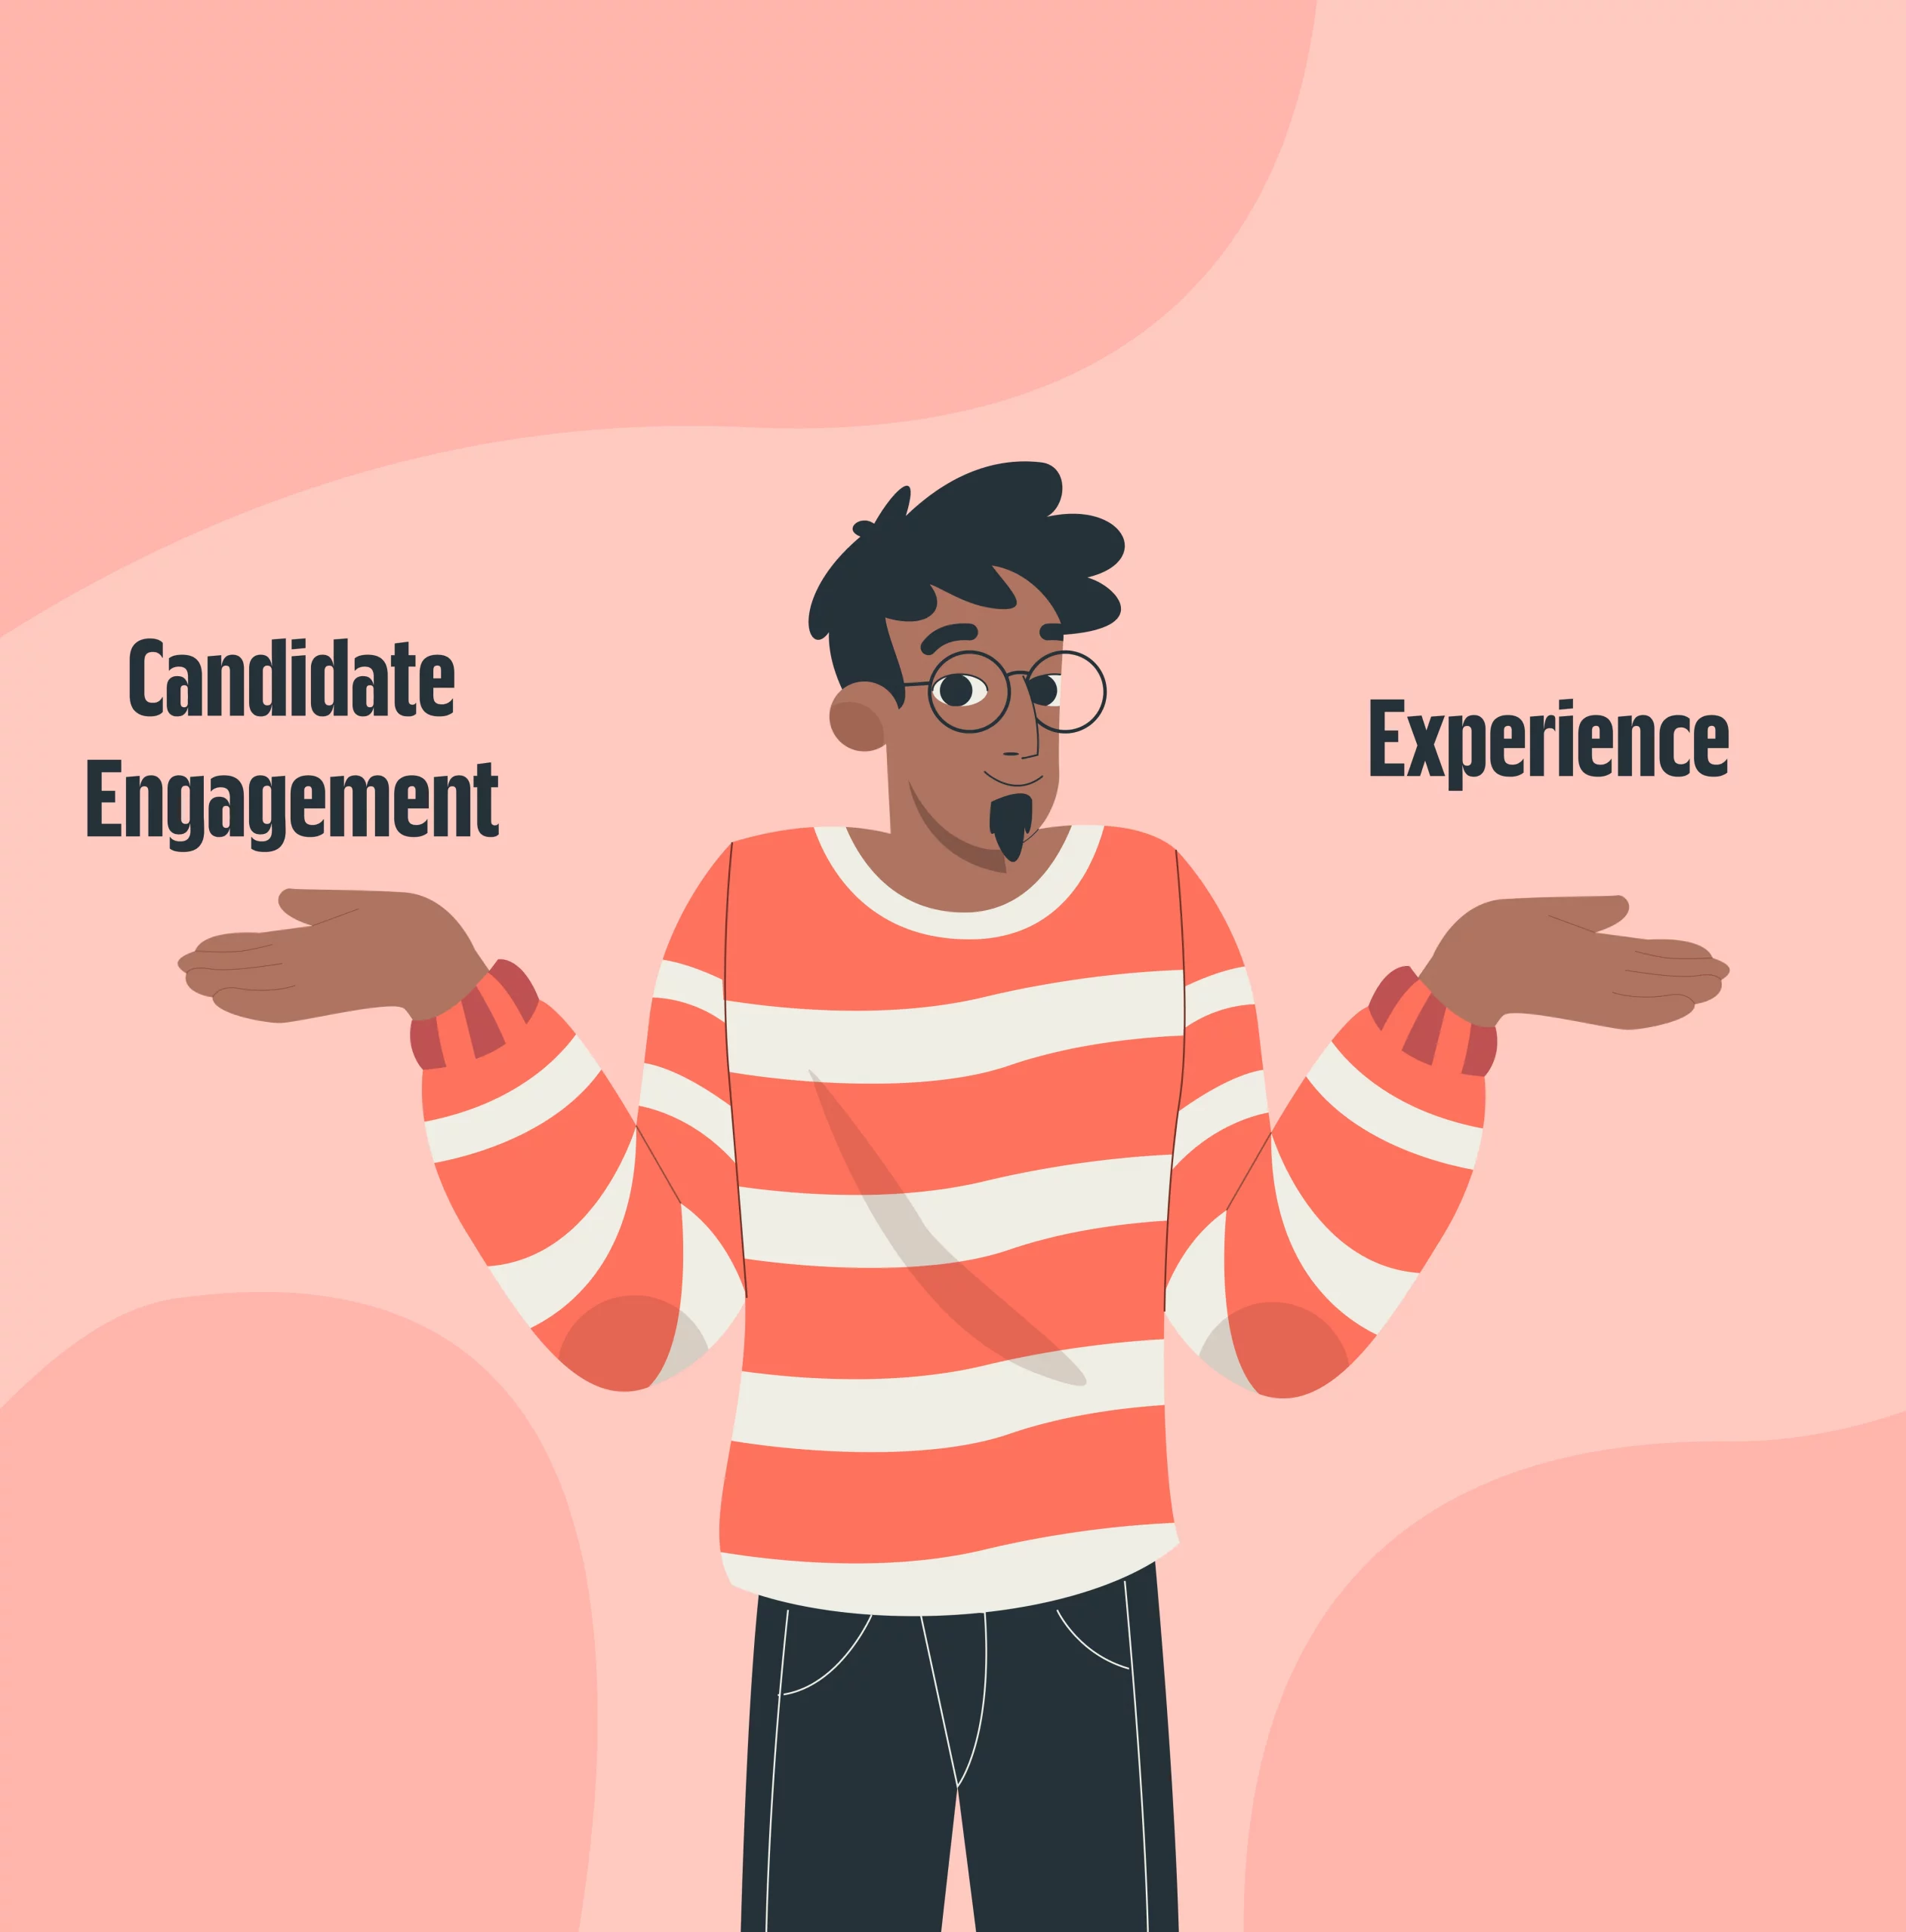 Candidate Engagement vs. Experience